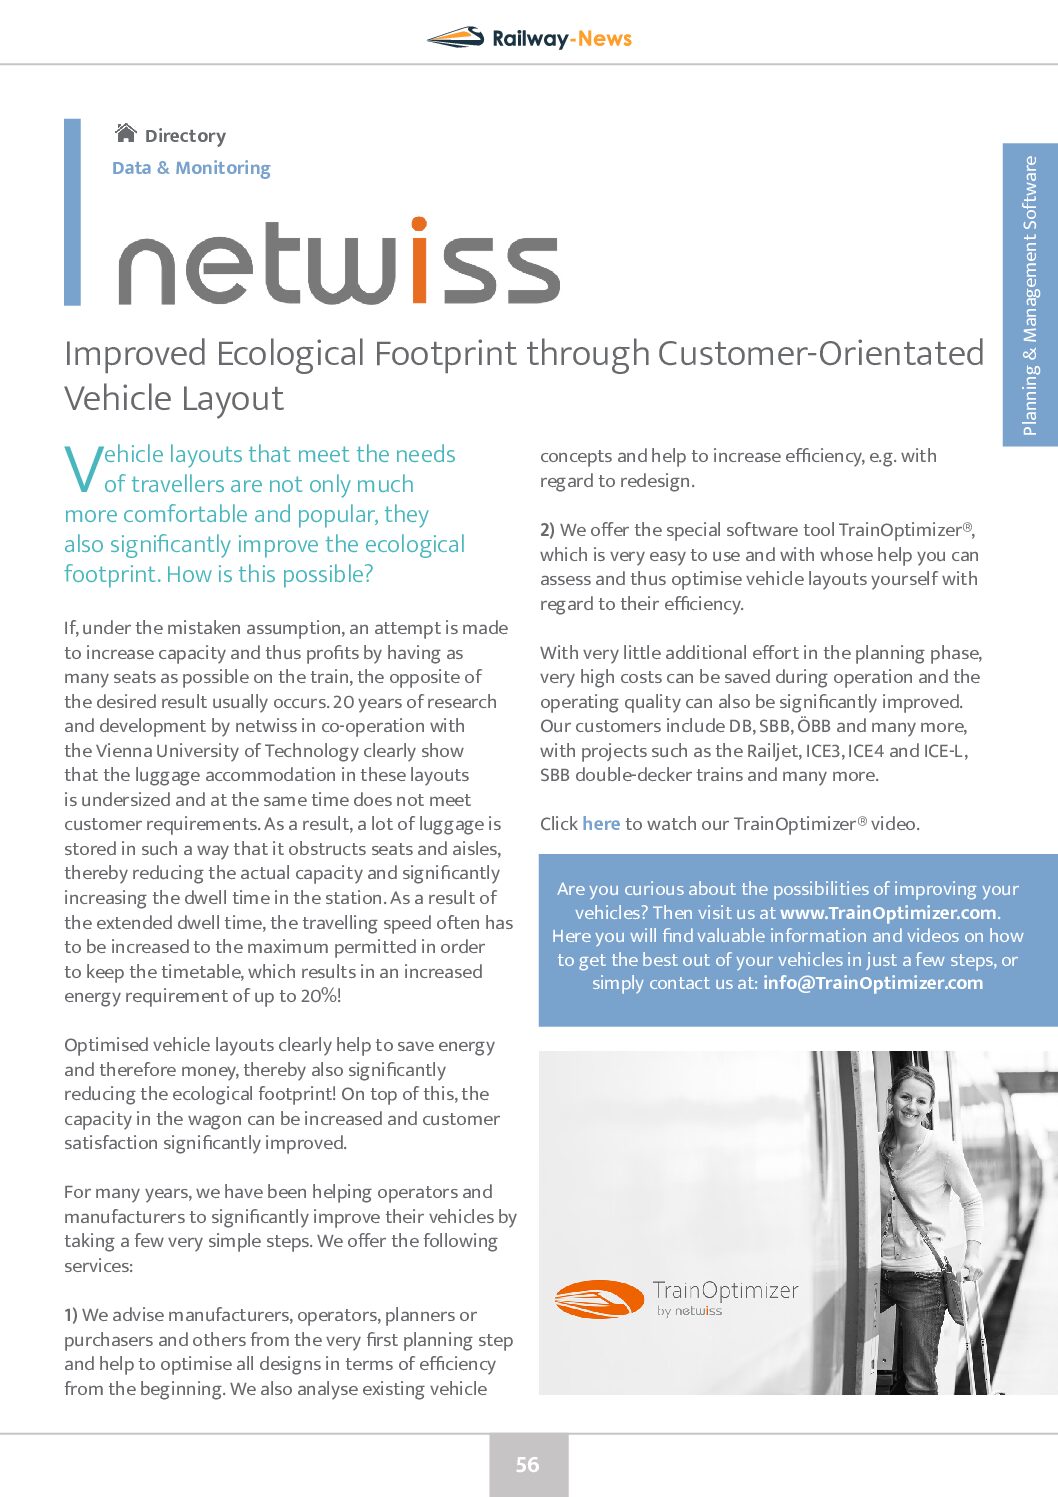 Improved Ecological Footprint through Customer-Orientated Vehicle Layout